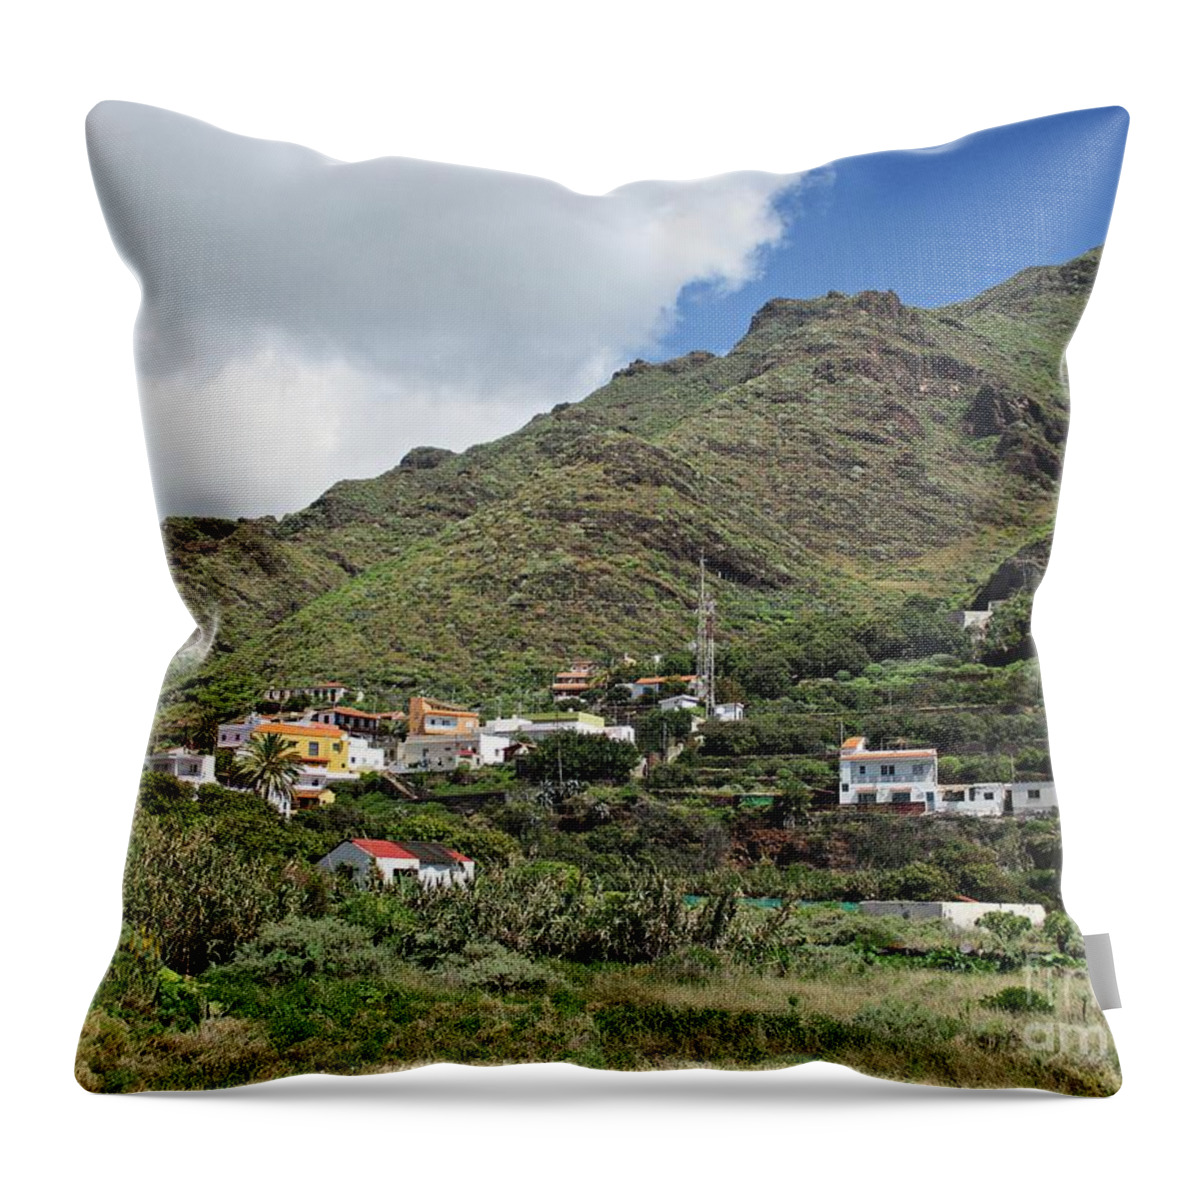 Blue Throw Pillow featuring the photograph Igueste de San Andres #3 by Chani Demuijlder